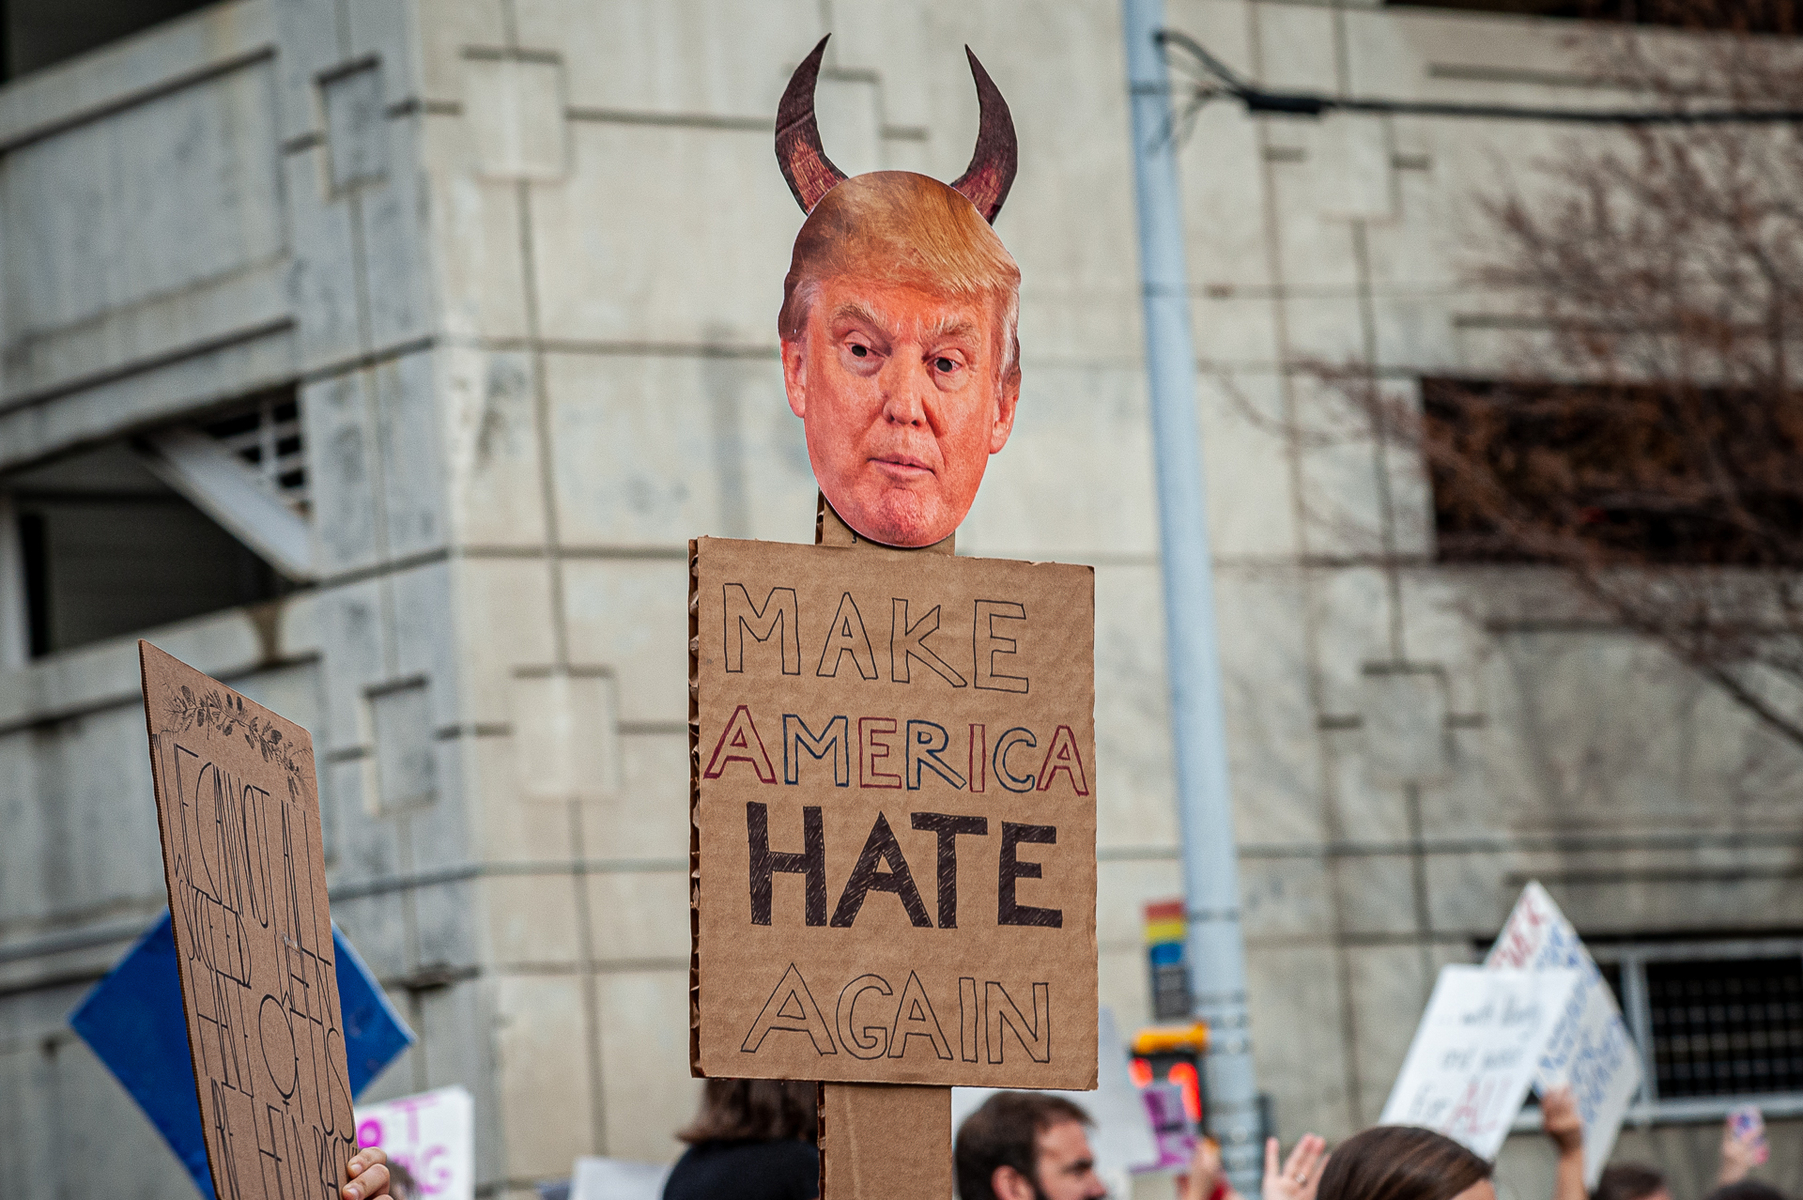 January 21, 2017 - Atlanta, Georgia. An attendee at the  Atlanta March for Social Justice and Women holds up a sign in protest of President-Elect Donald J. Trump. An estimated 60,000 demonstrators  attended the march.